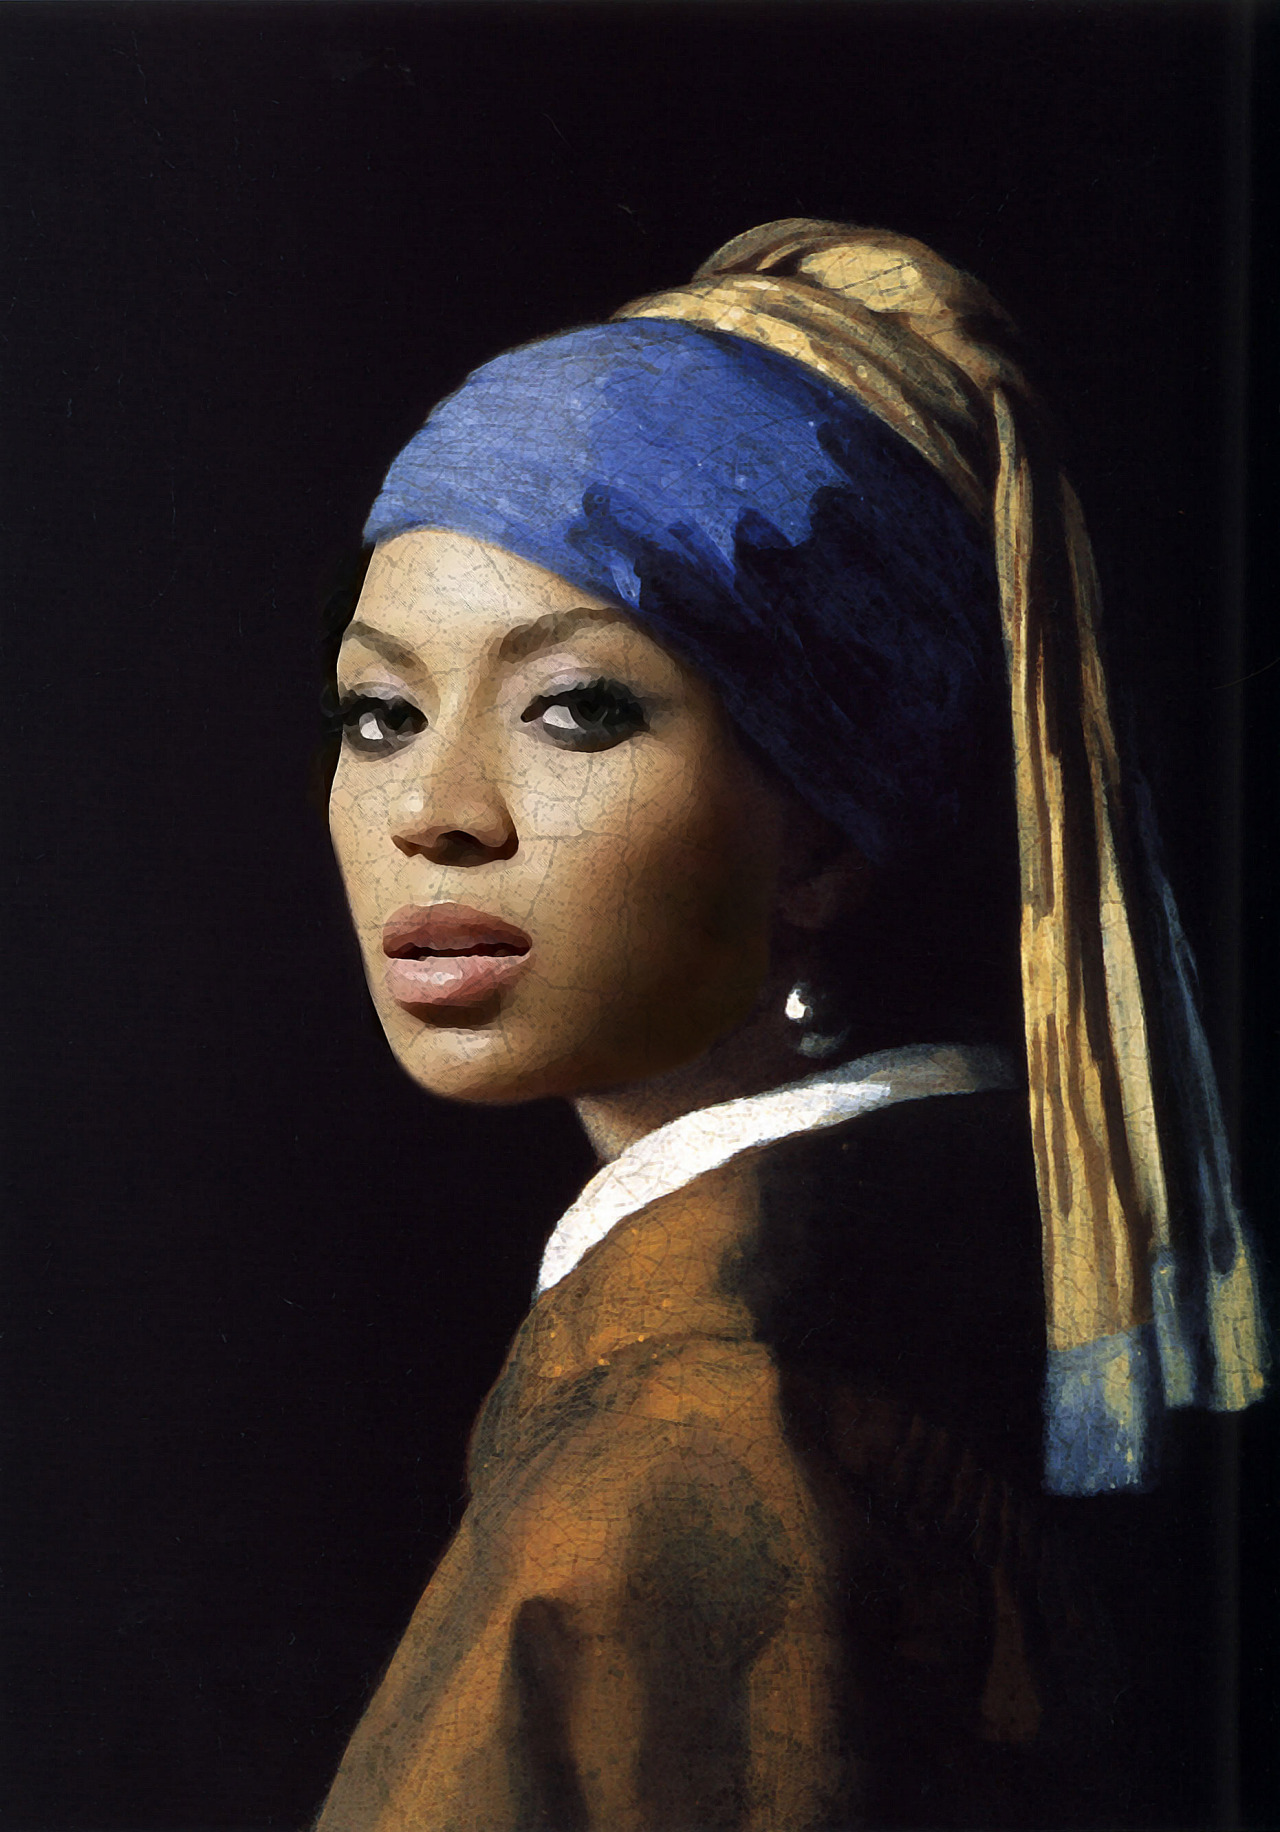 Beyonce photoshopped onto Girl With a Pearl Earring